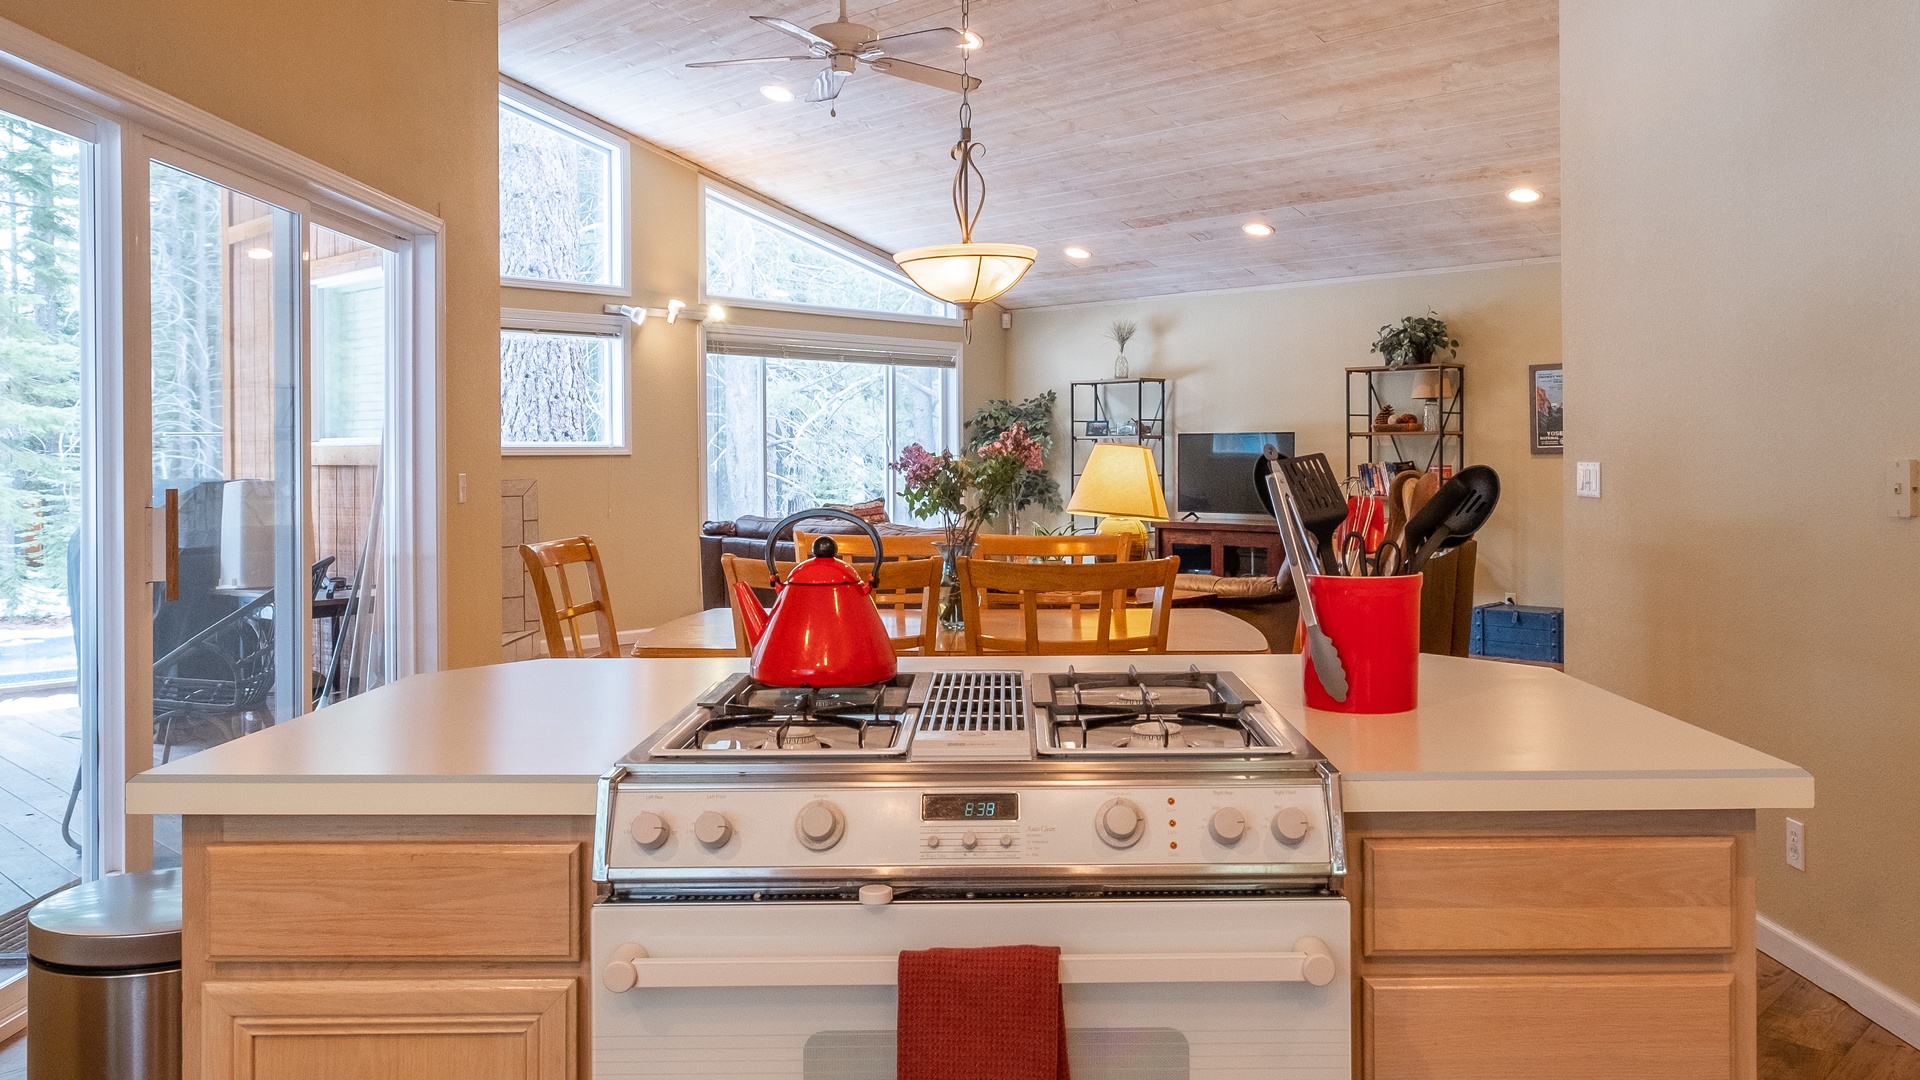 Kitchen Stovetop into Dining Room: Three Pines Family Cabin